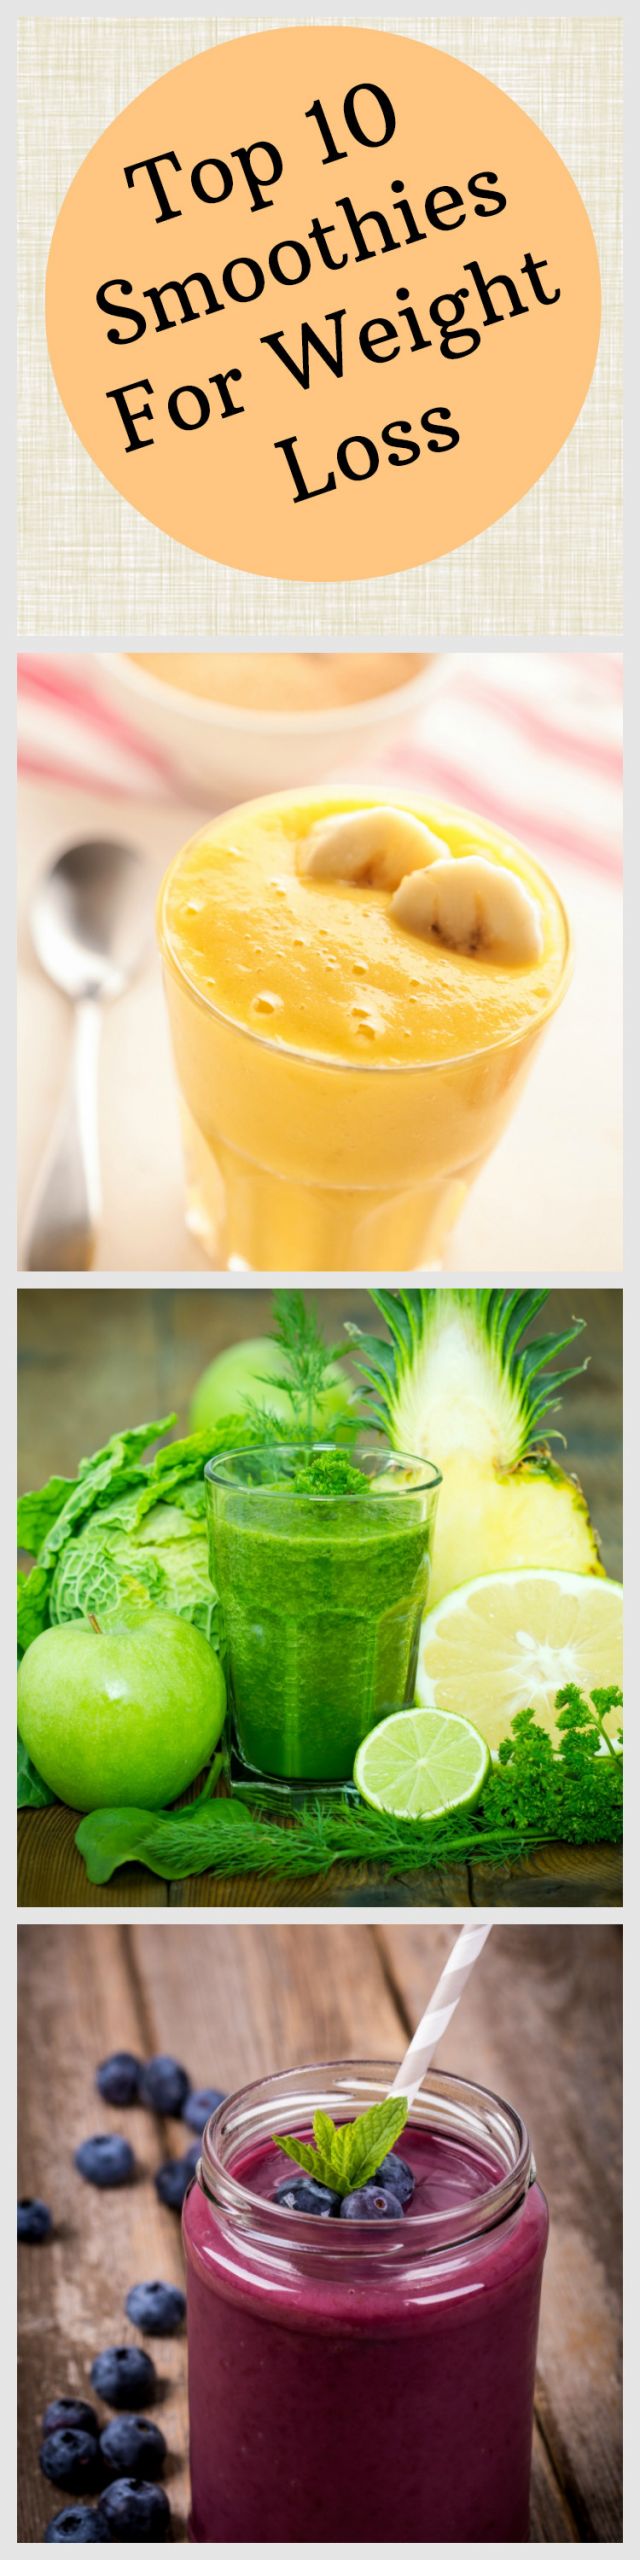 Best Smoothies For Weight Loss
 10 Awesome Smoothies for Weight Loss All Nutribullet Recipes